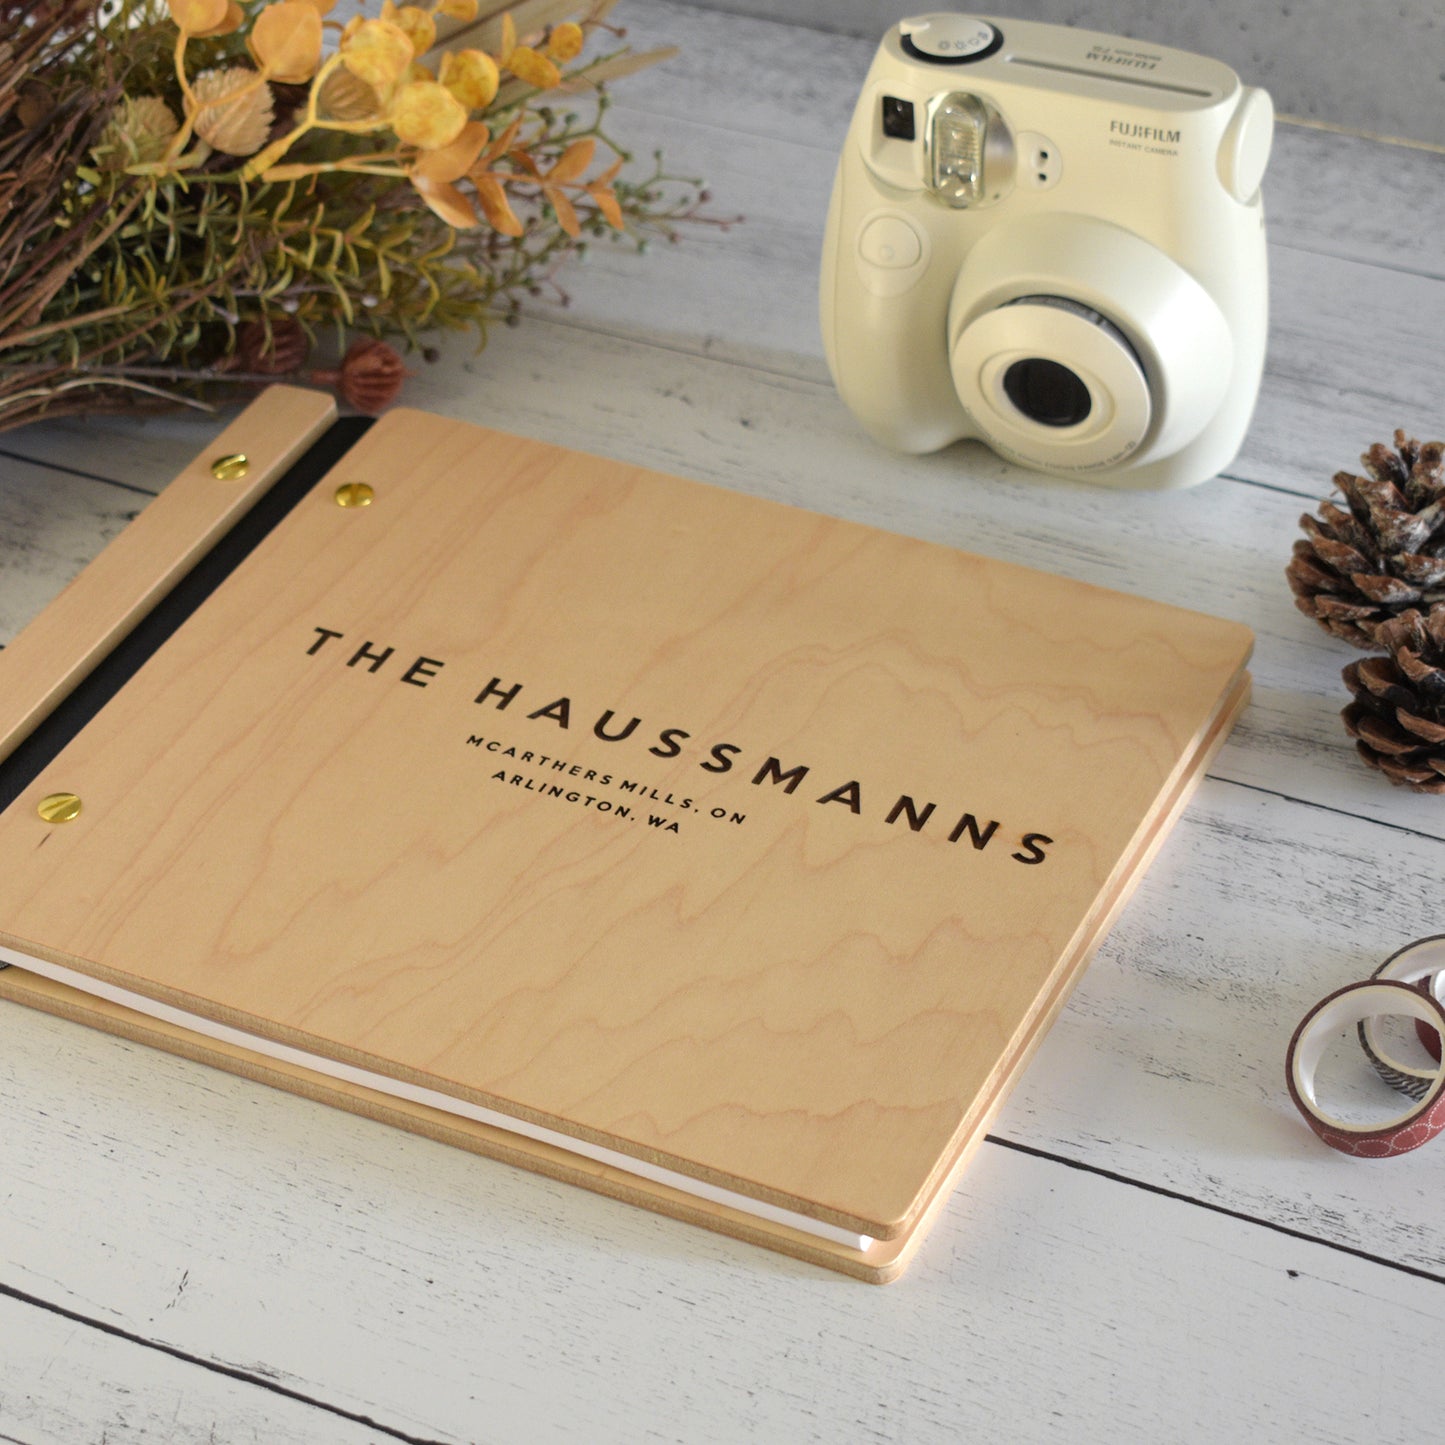 An 8.5x11" guest book lies on a table. Made of maple wood, black vegan leather binding, and gold hardware. The front cover includes an engraved design with personalized names.